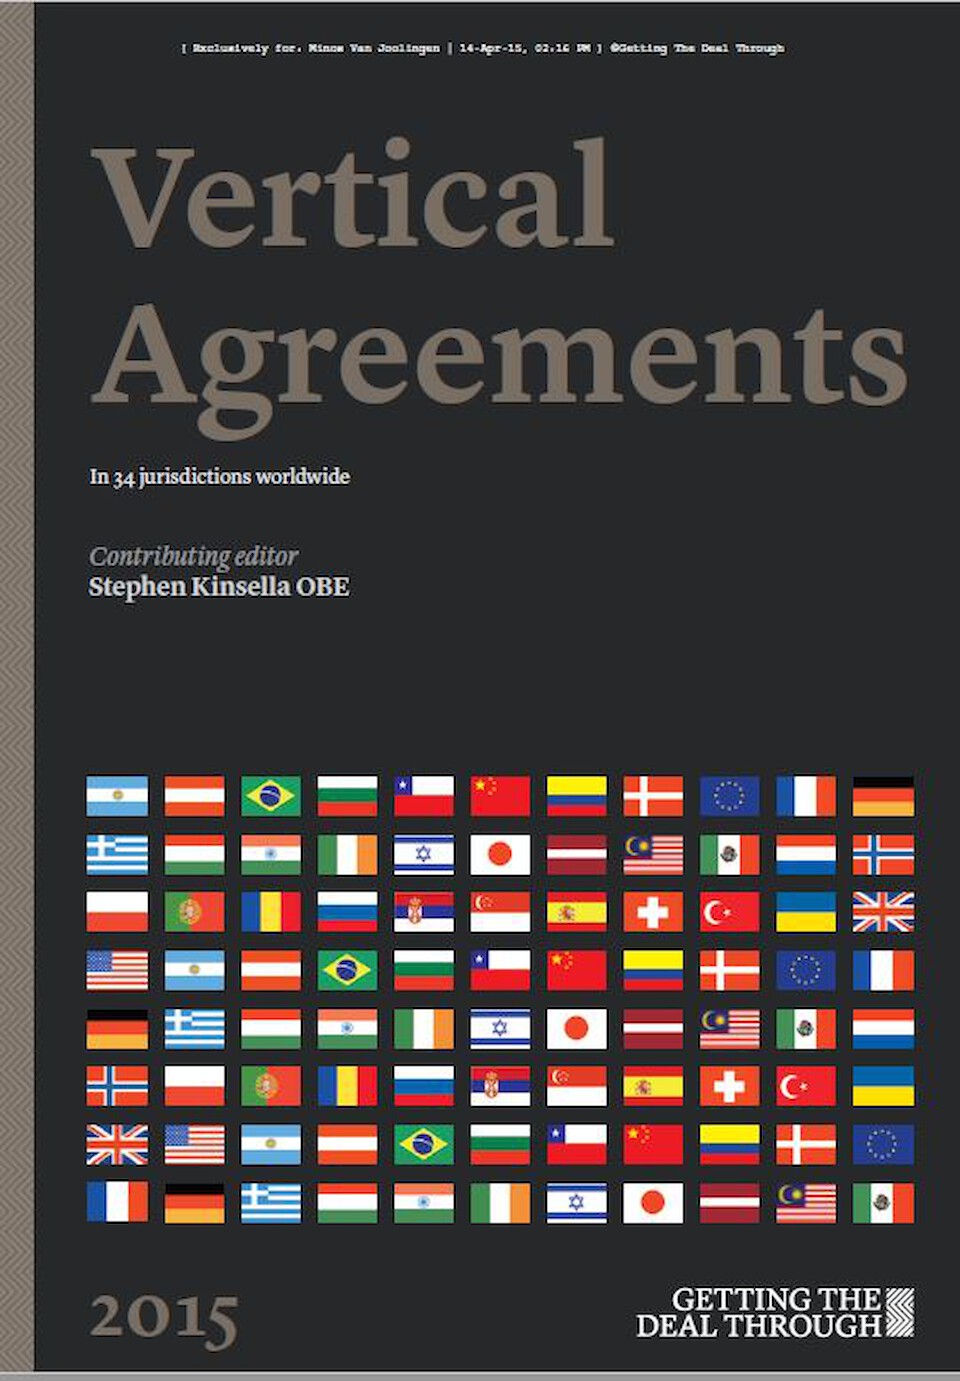 Vertical agreements 2015